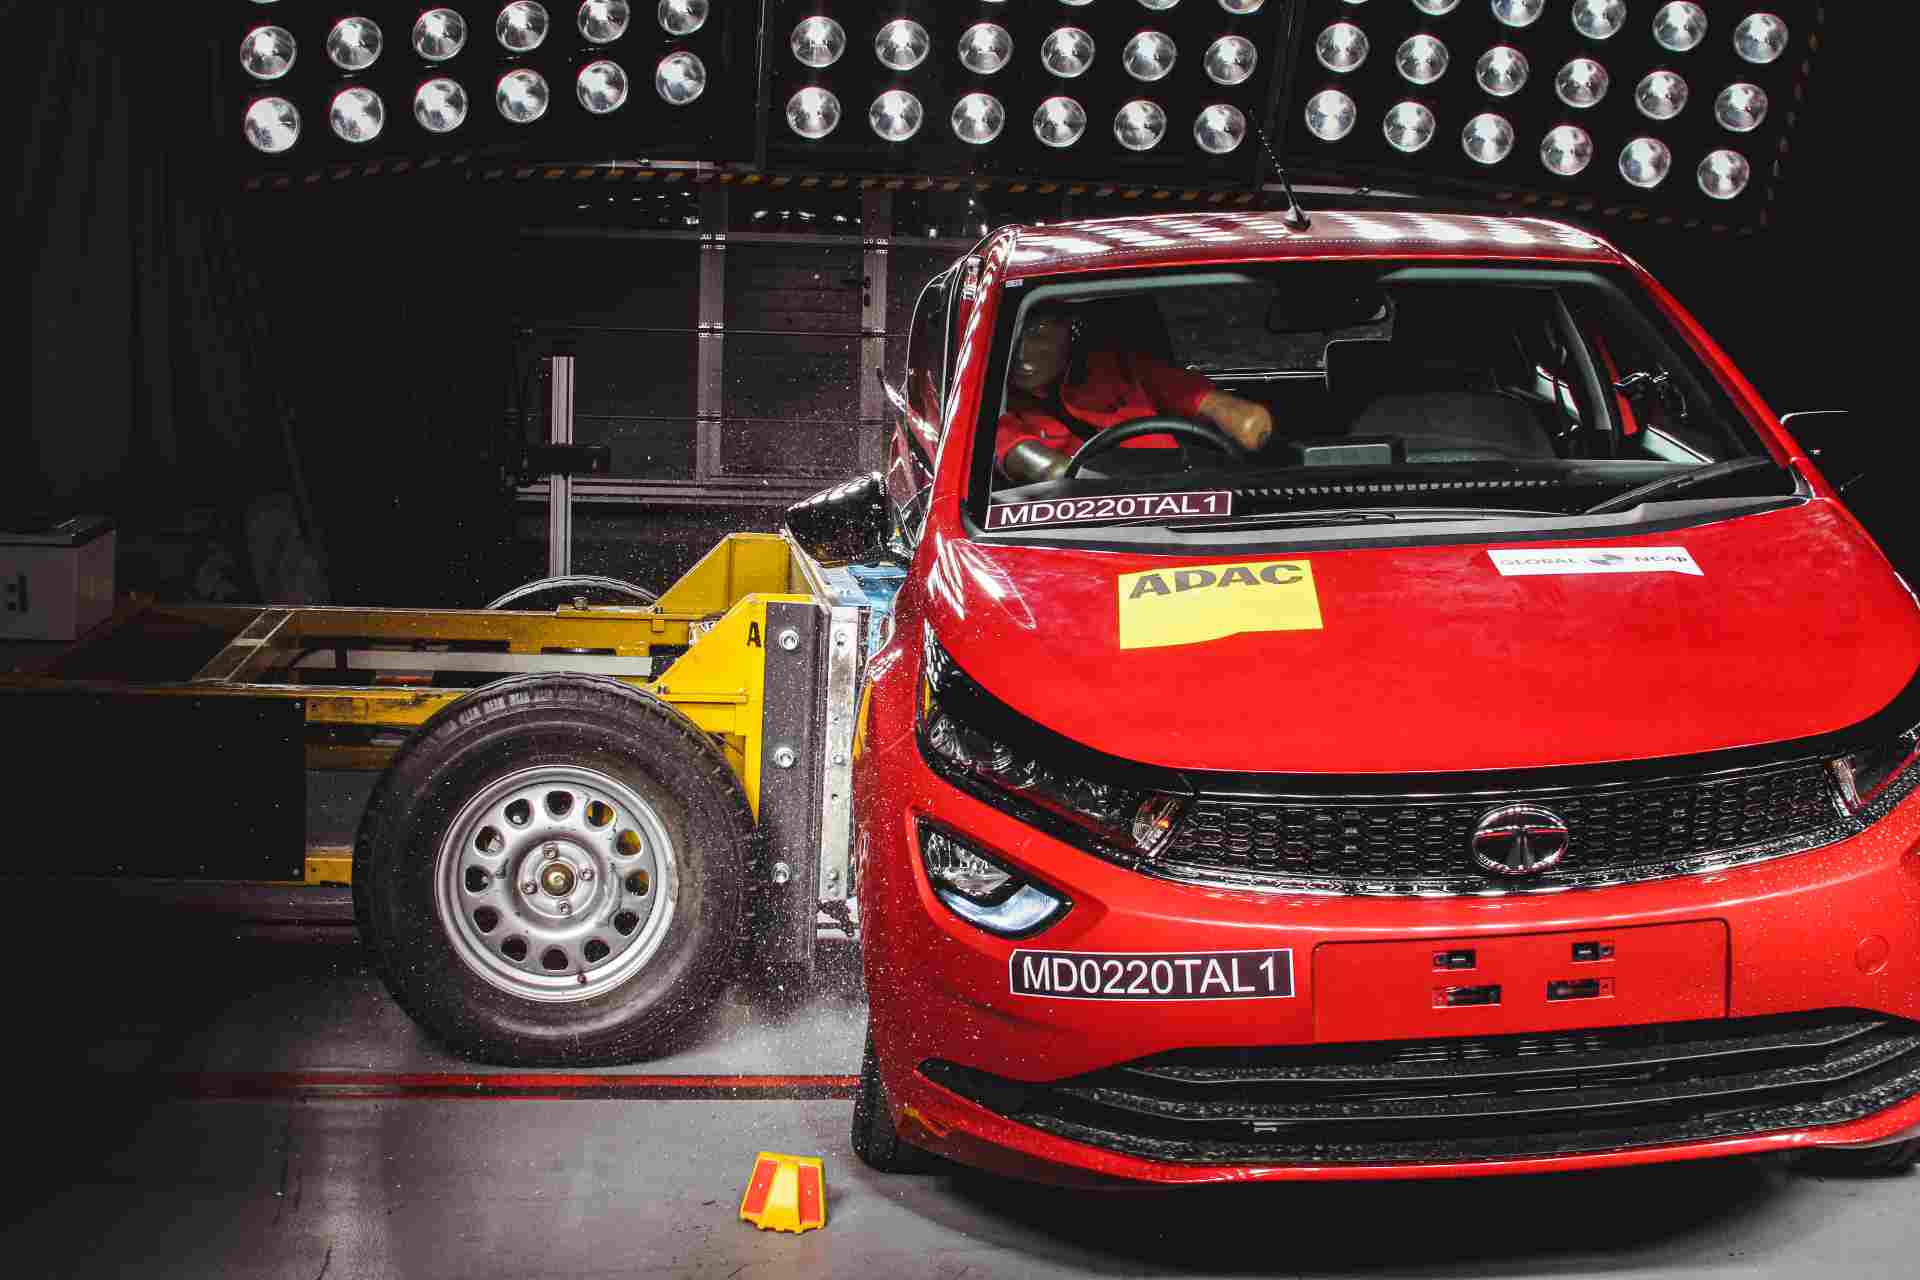 The Tata Altroz remains the only premium hatchback on sale in India to be awarded five stars by Global NCAP. Image: Global NCAP